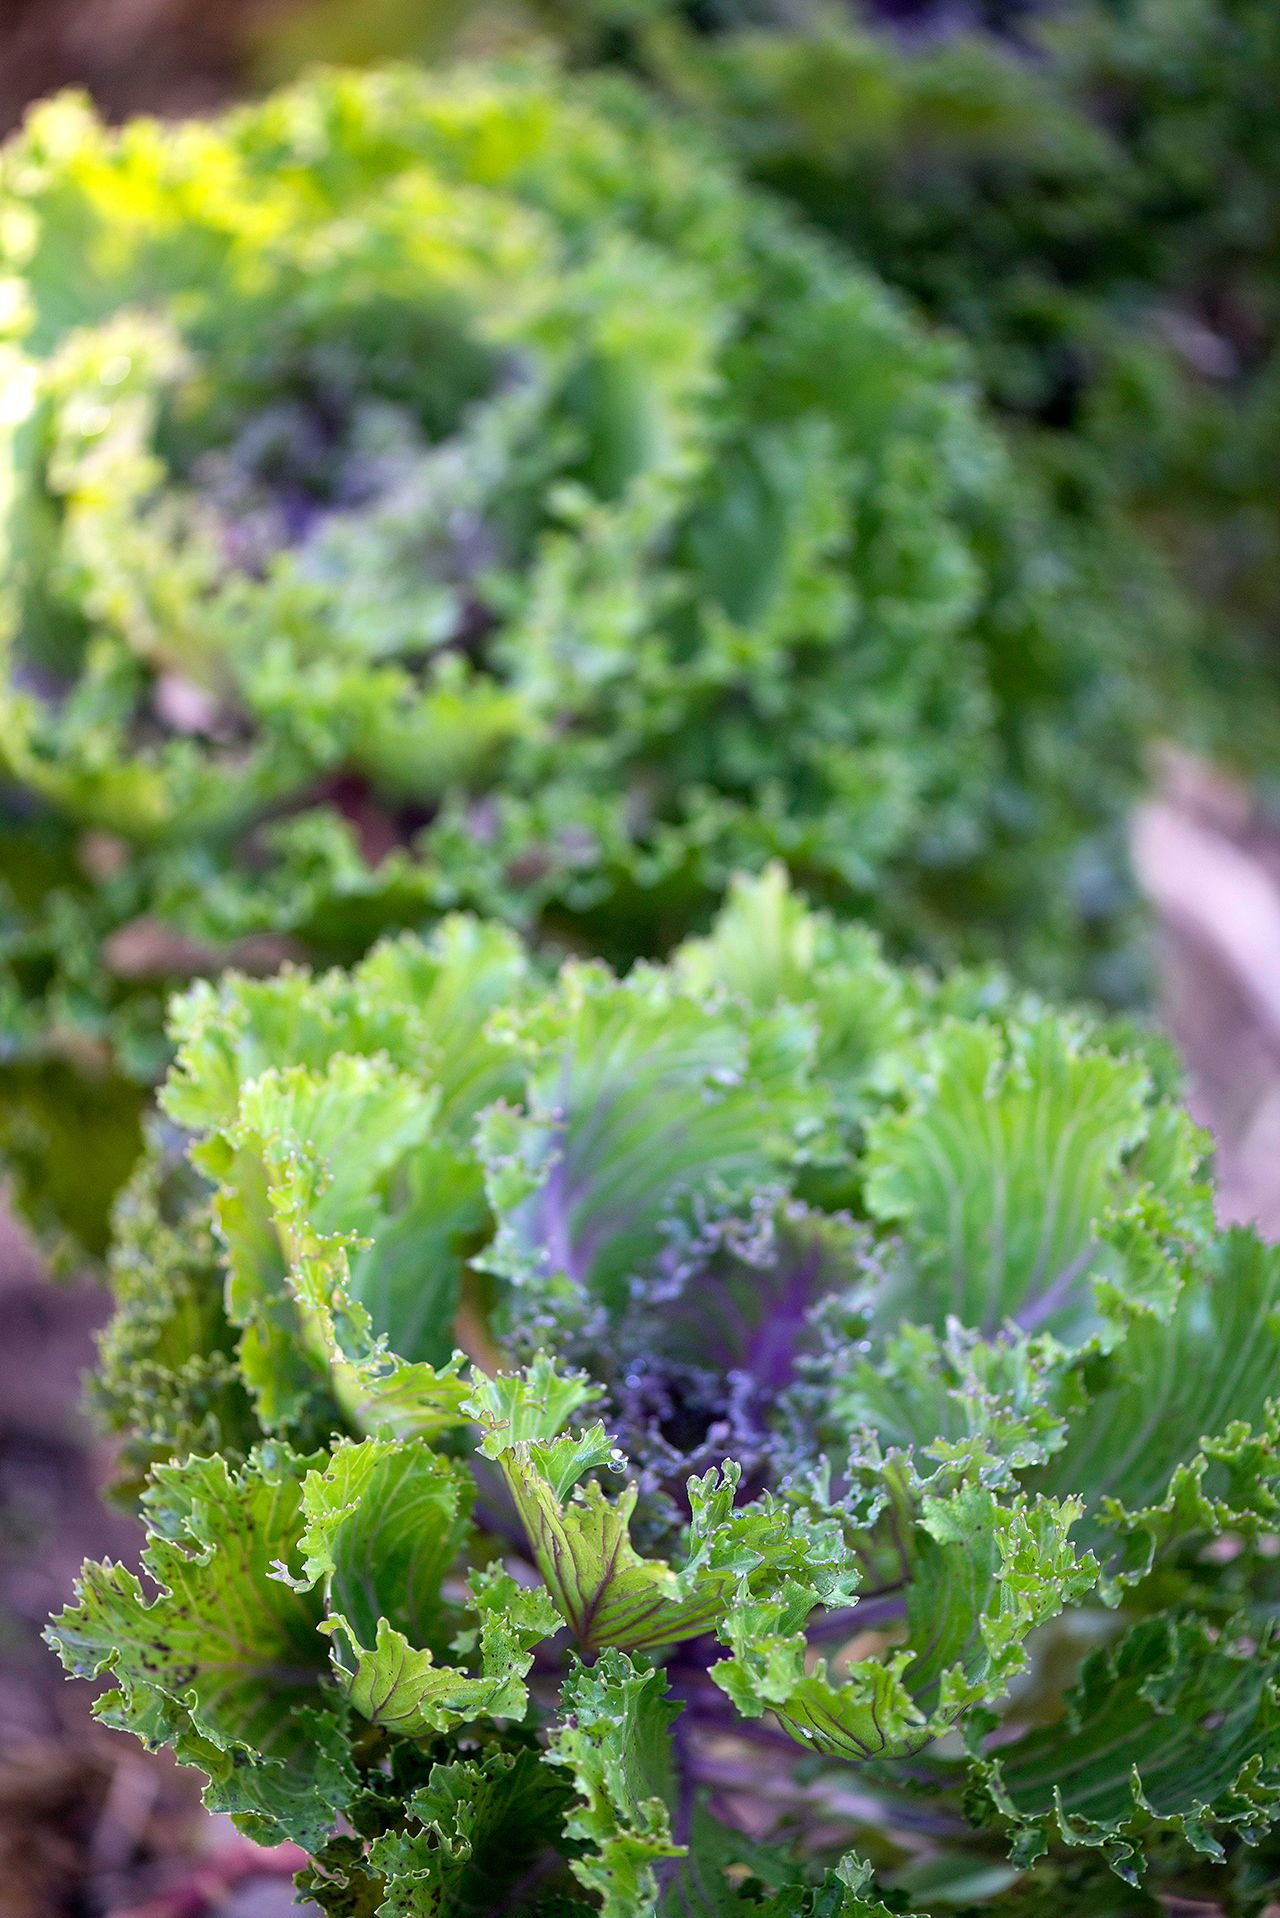 10 Easy, Fast-Growing Vegetables You Can Harvest in Almost No Time